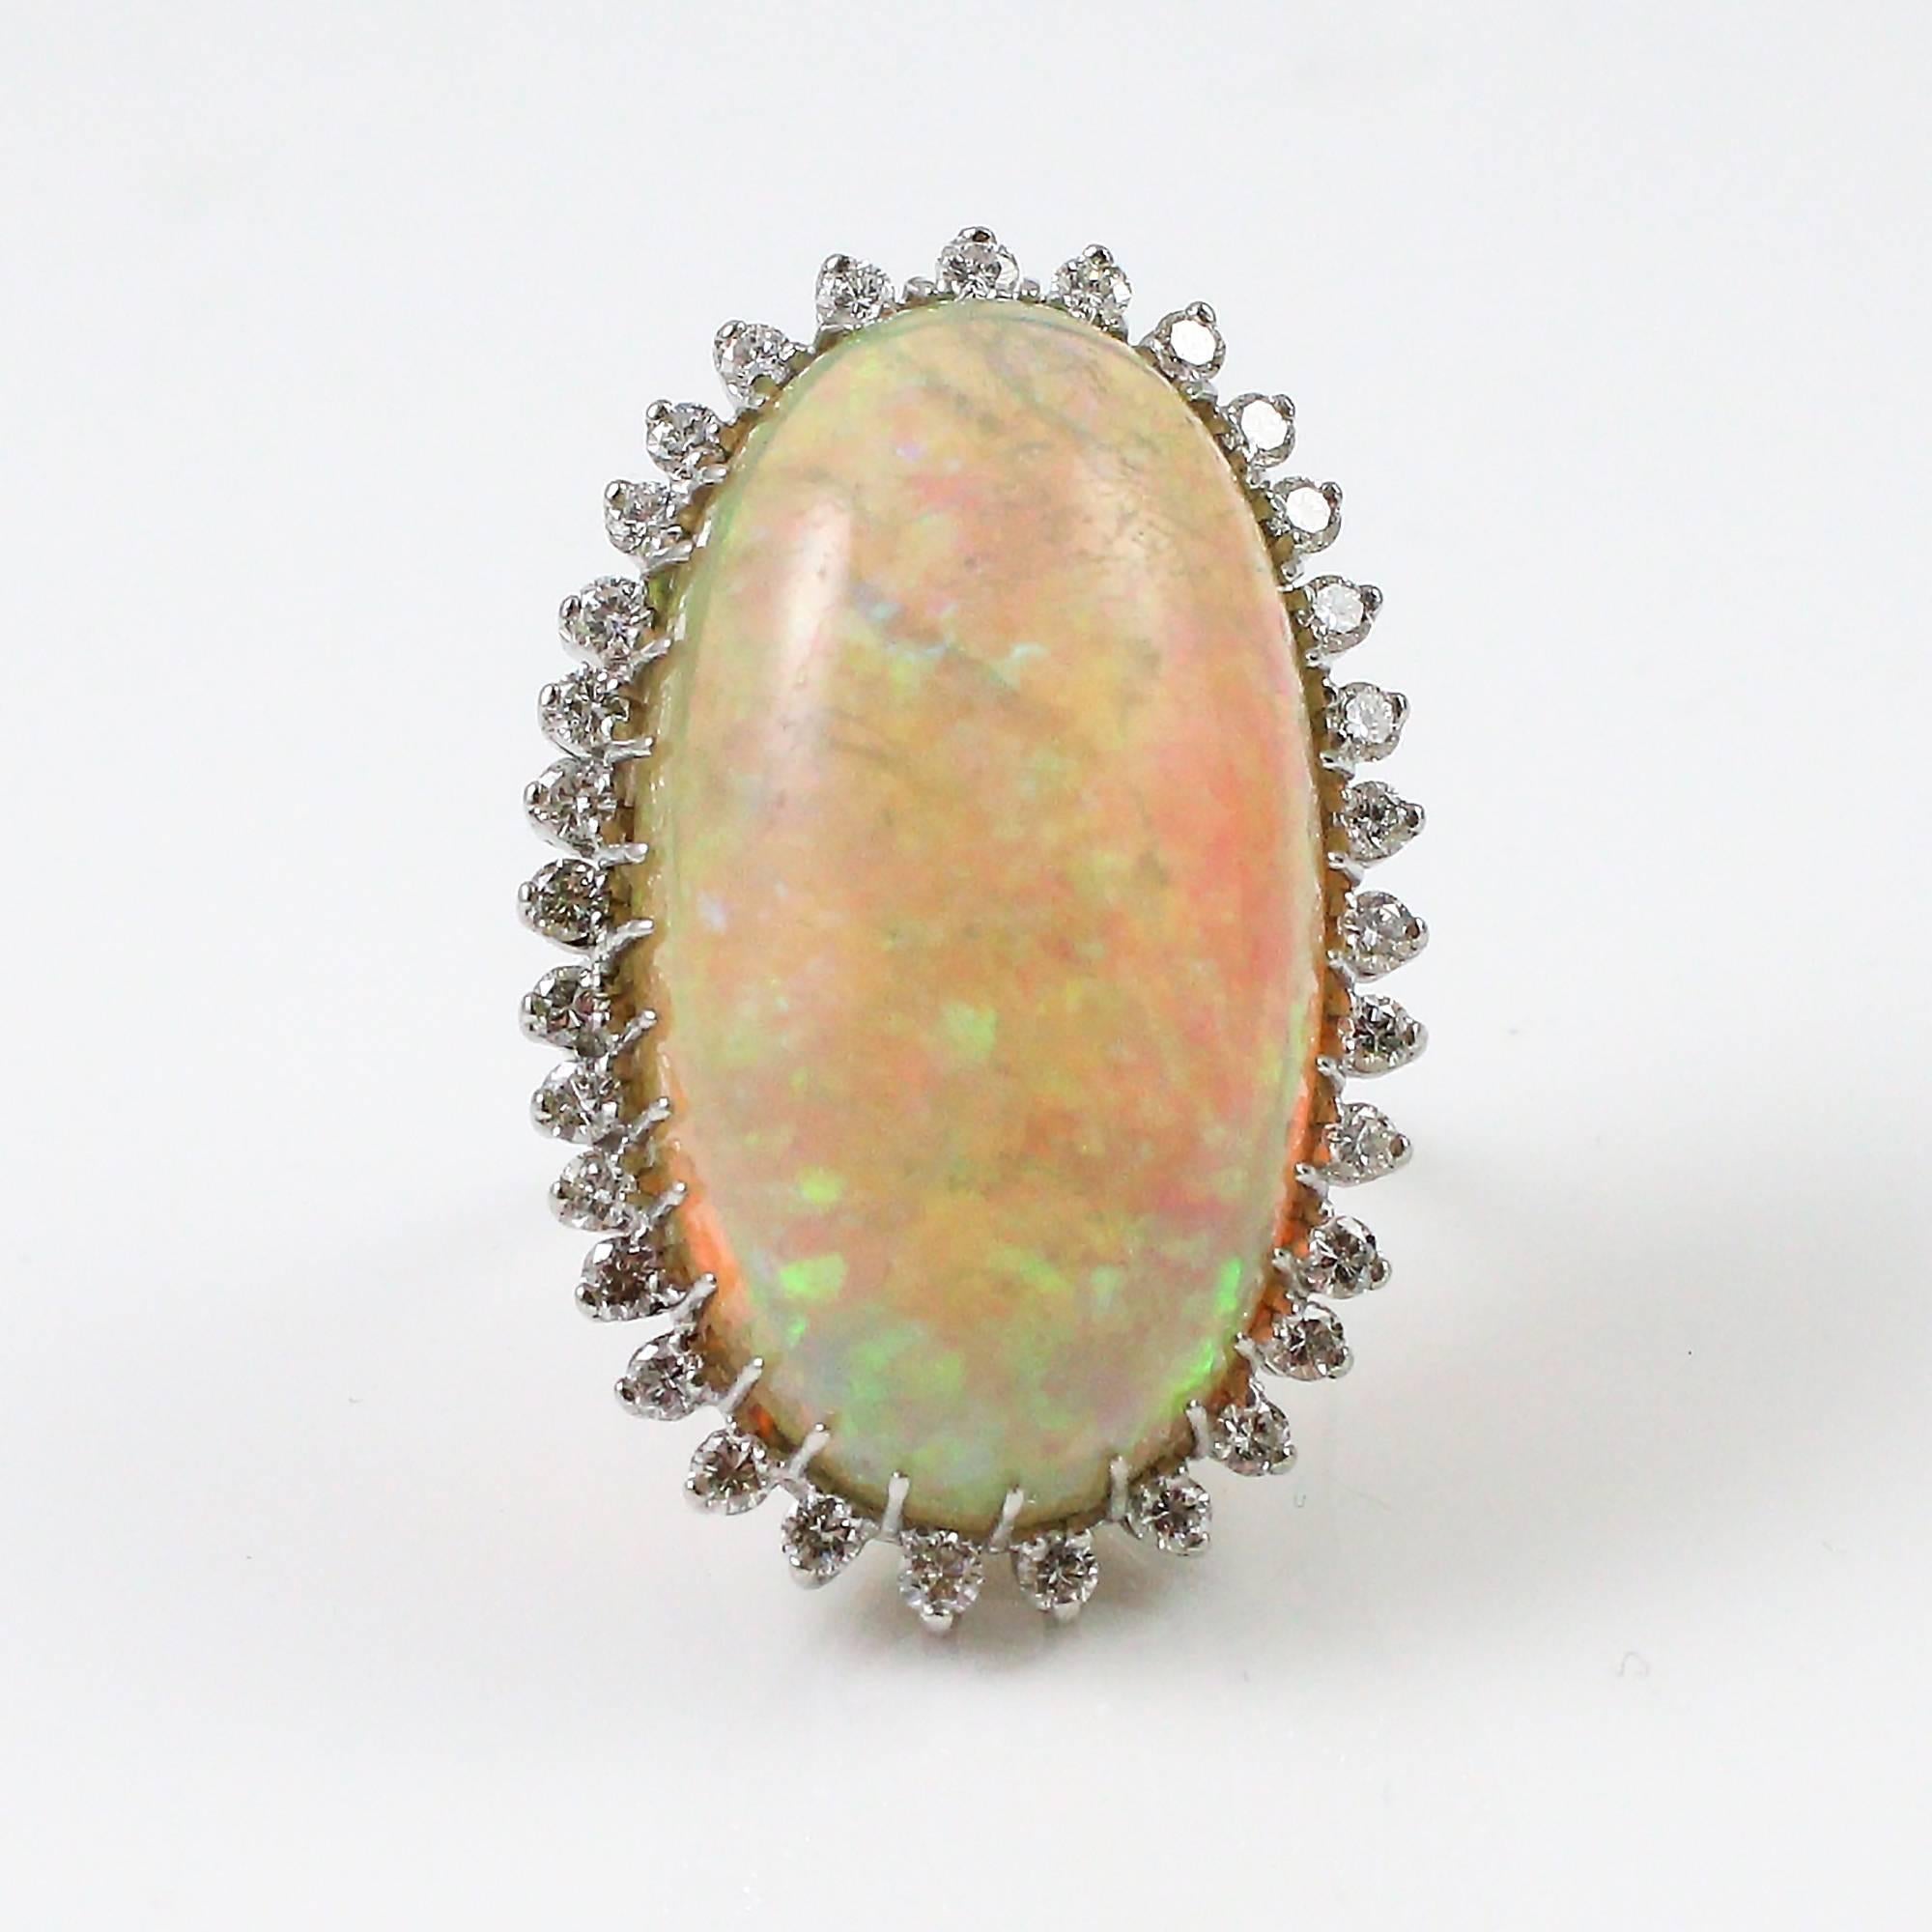 1960s-70s Modernist 47.05 Carat Cabochon Opal Ring with Diamond Halo 1